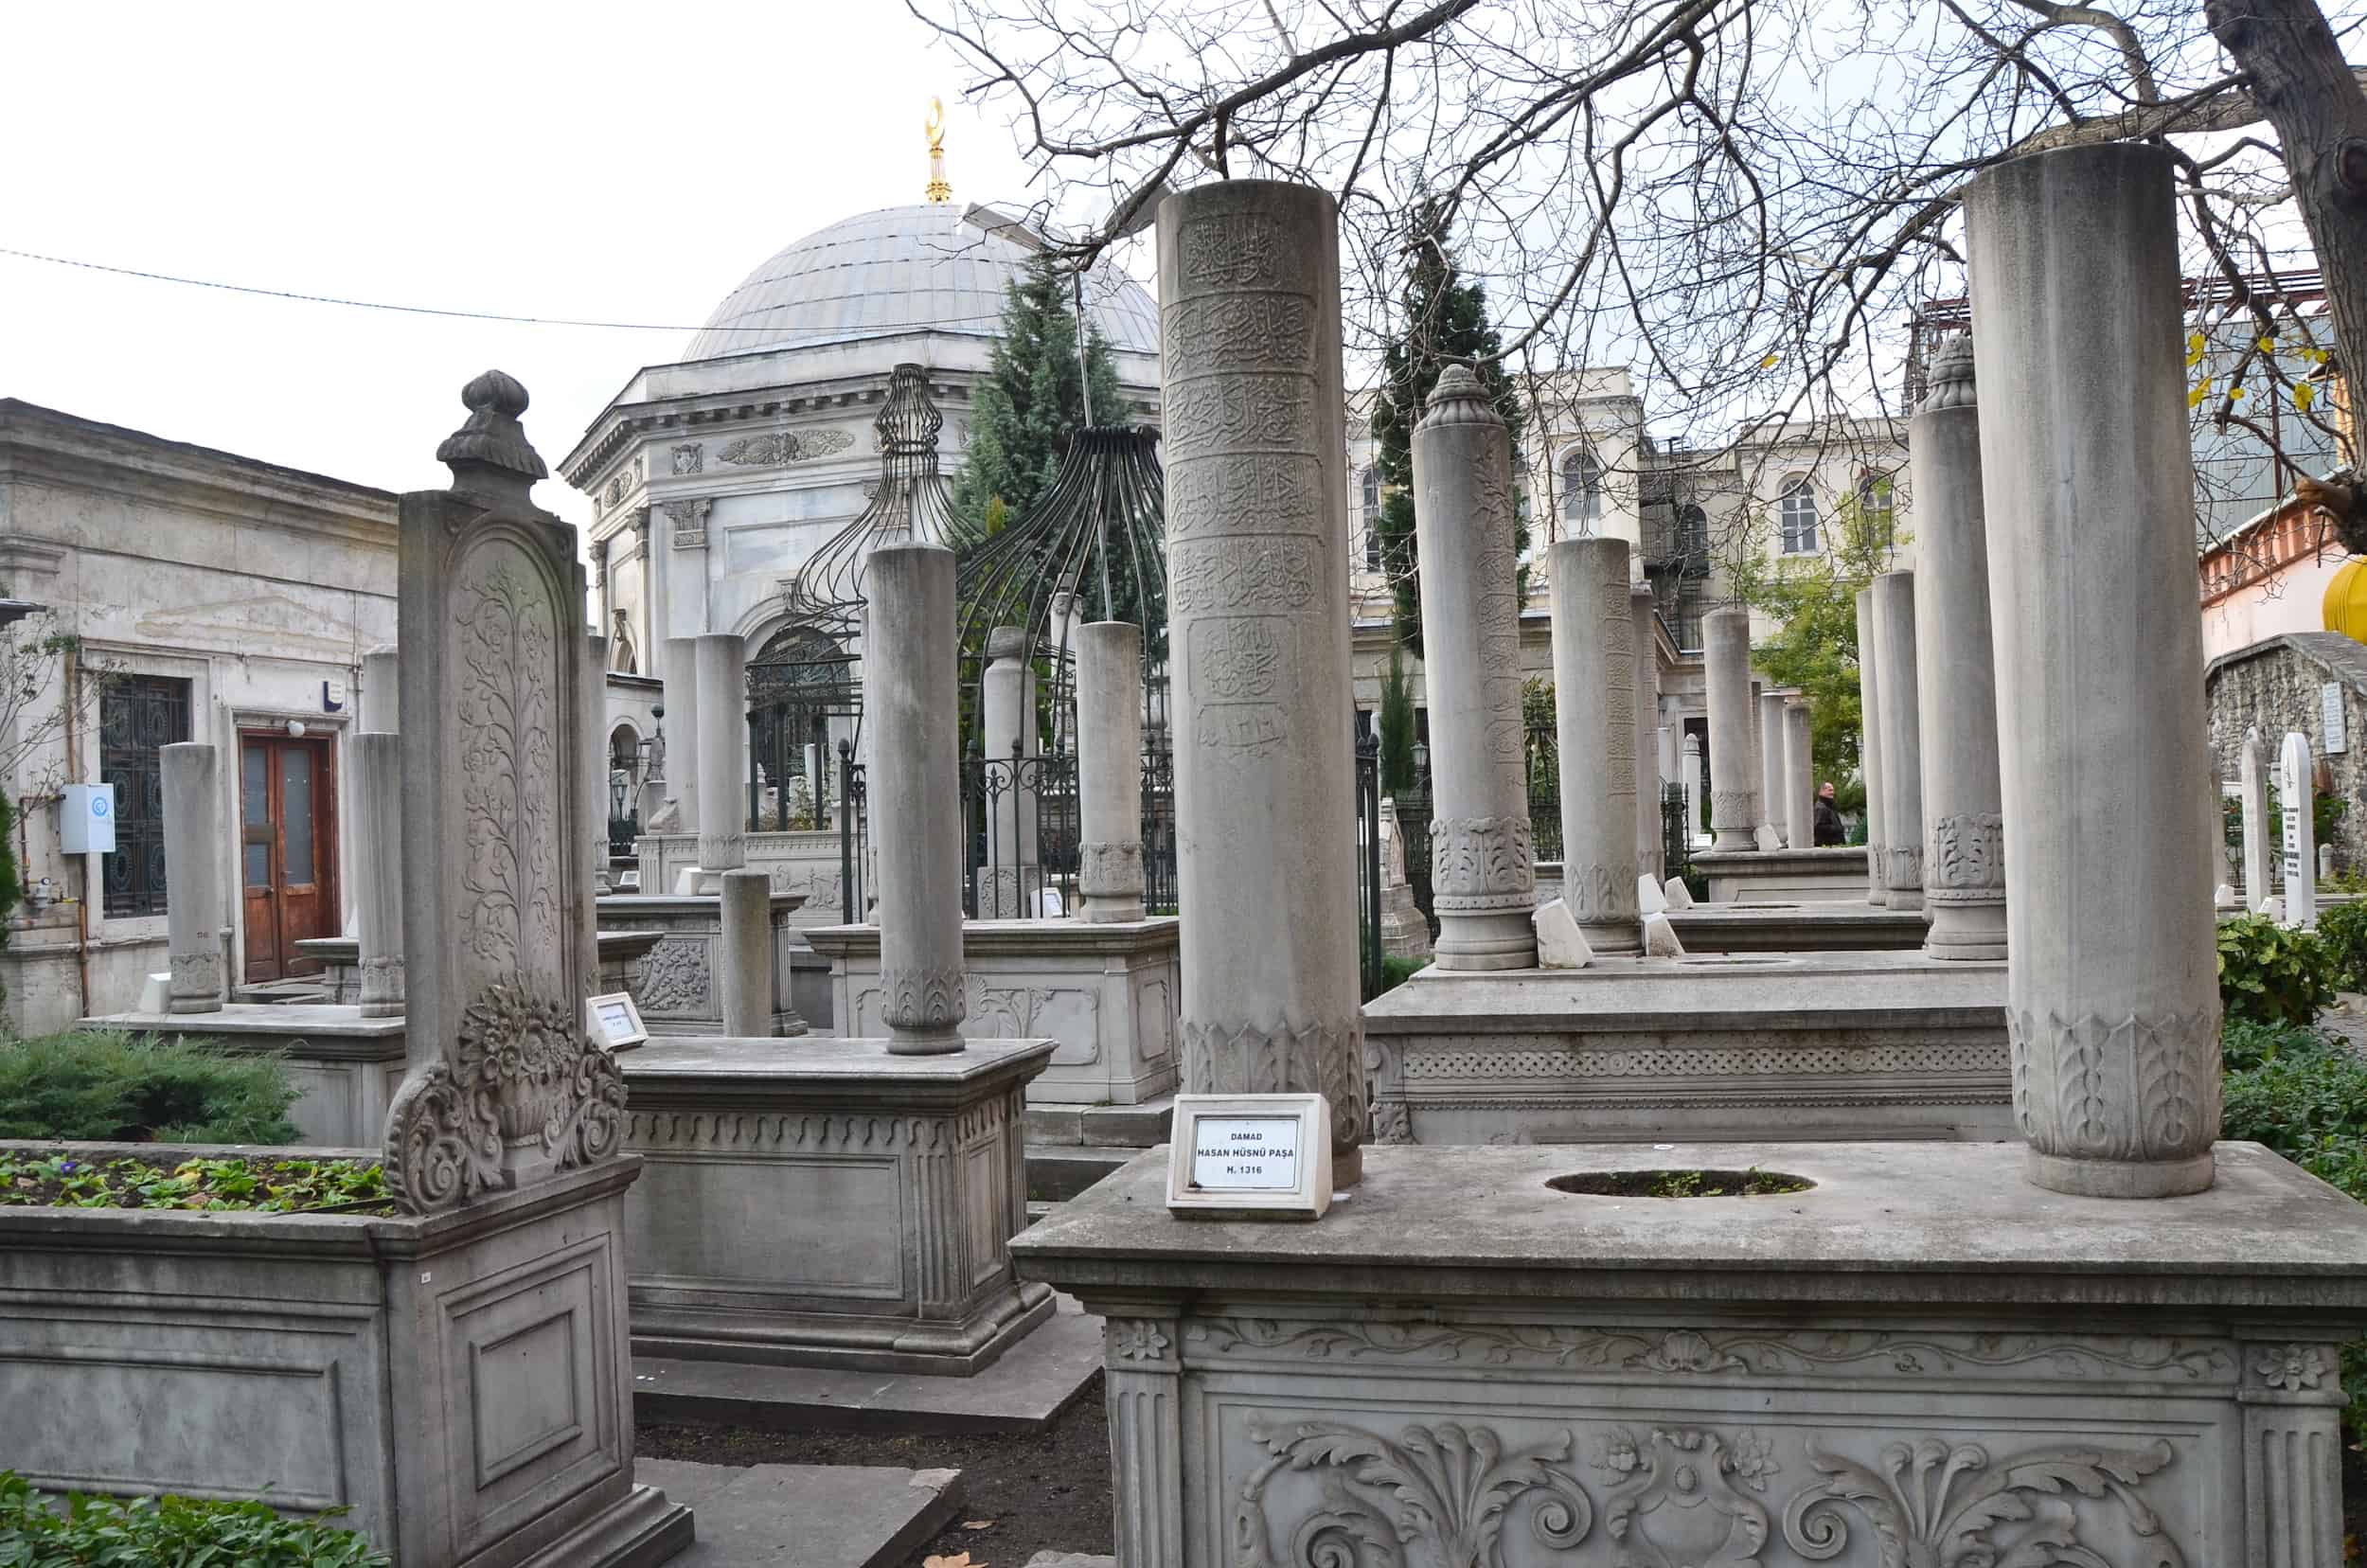 Cemetery at the Tomb of Mahmud II in Istanbul, Turkey